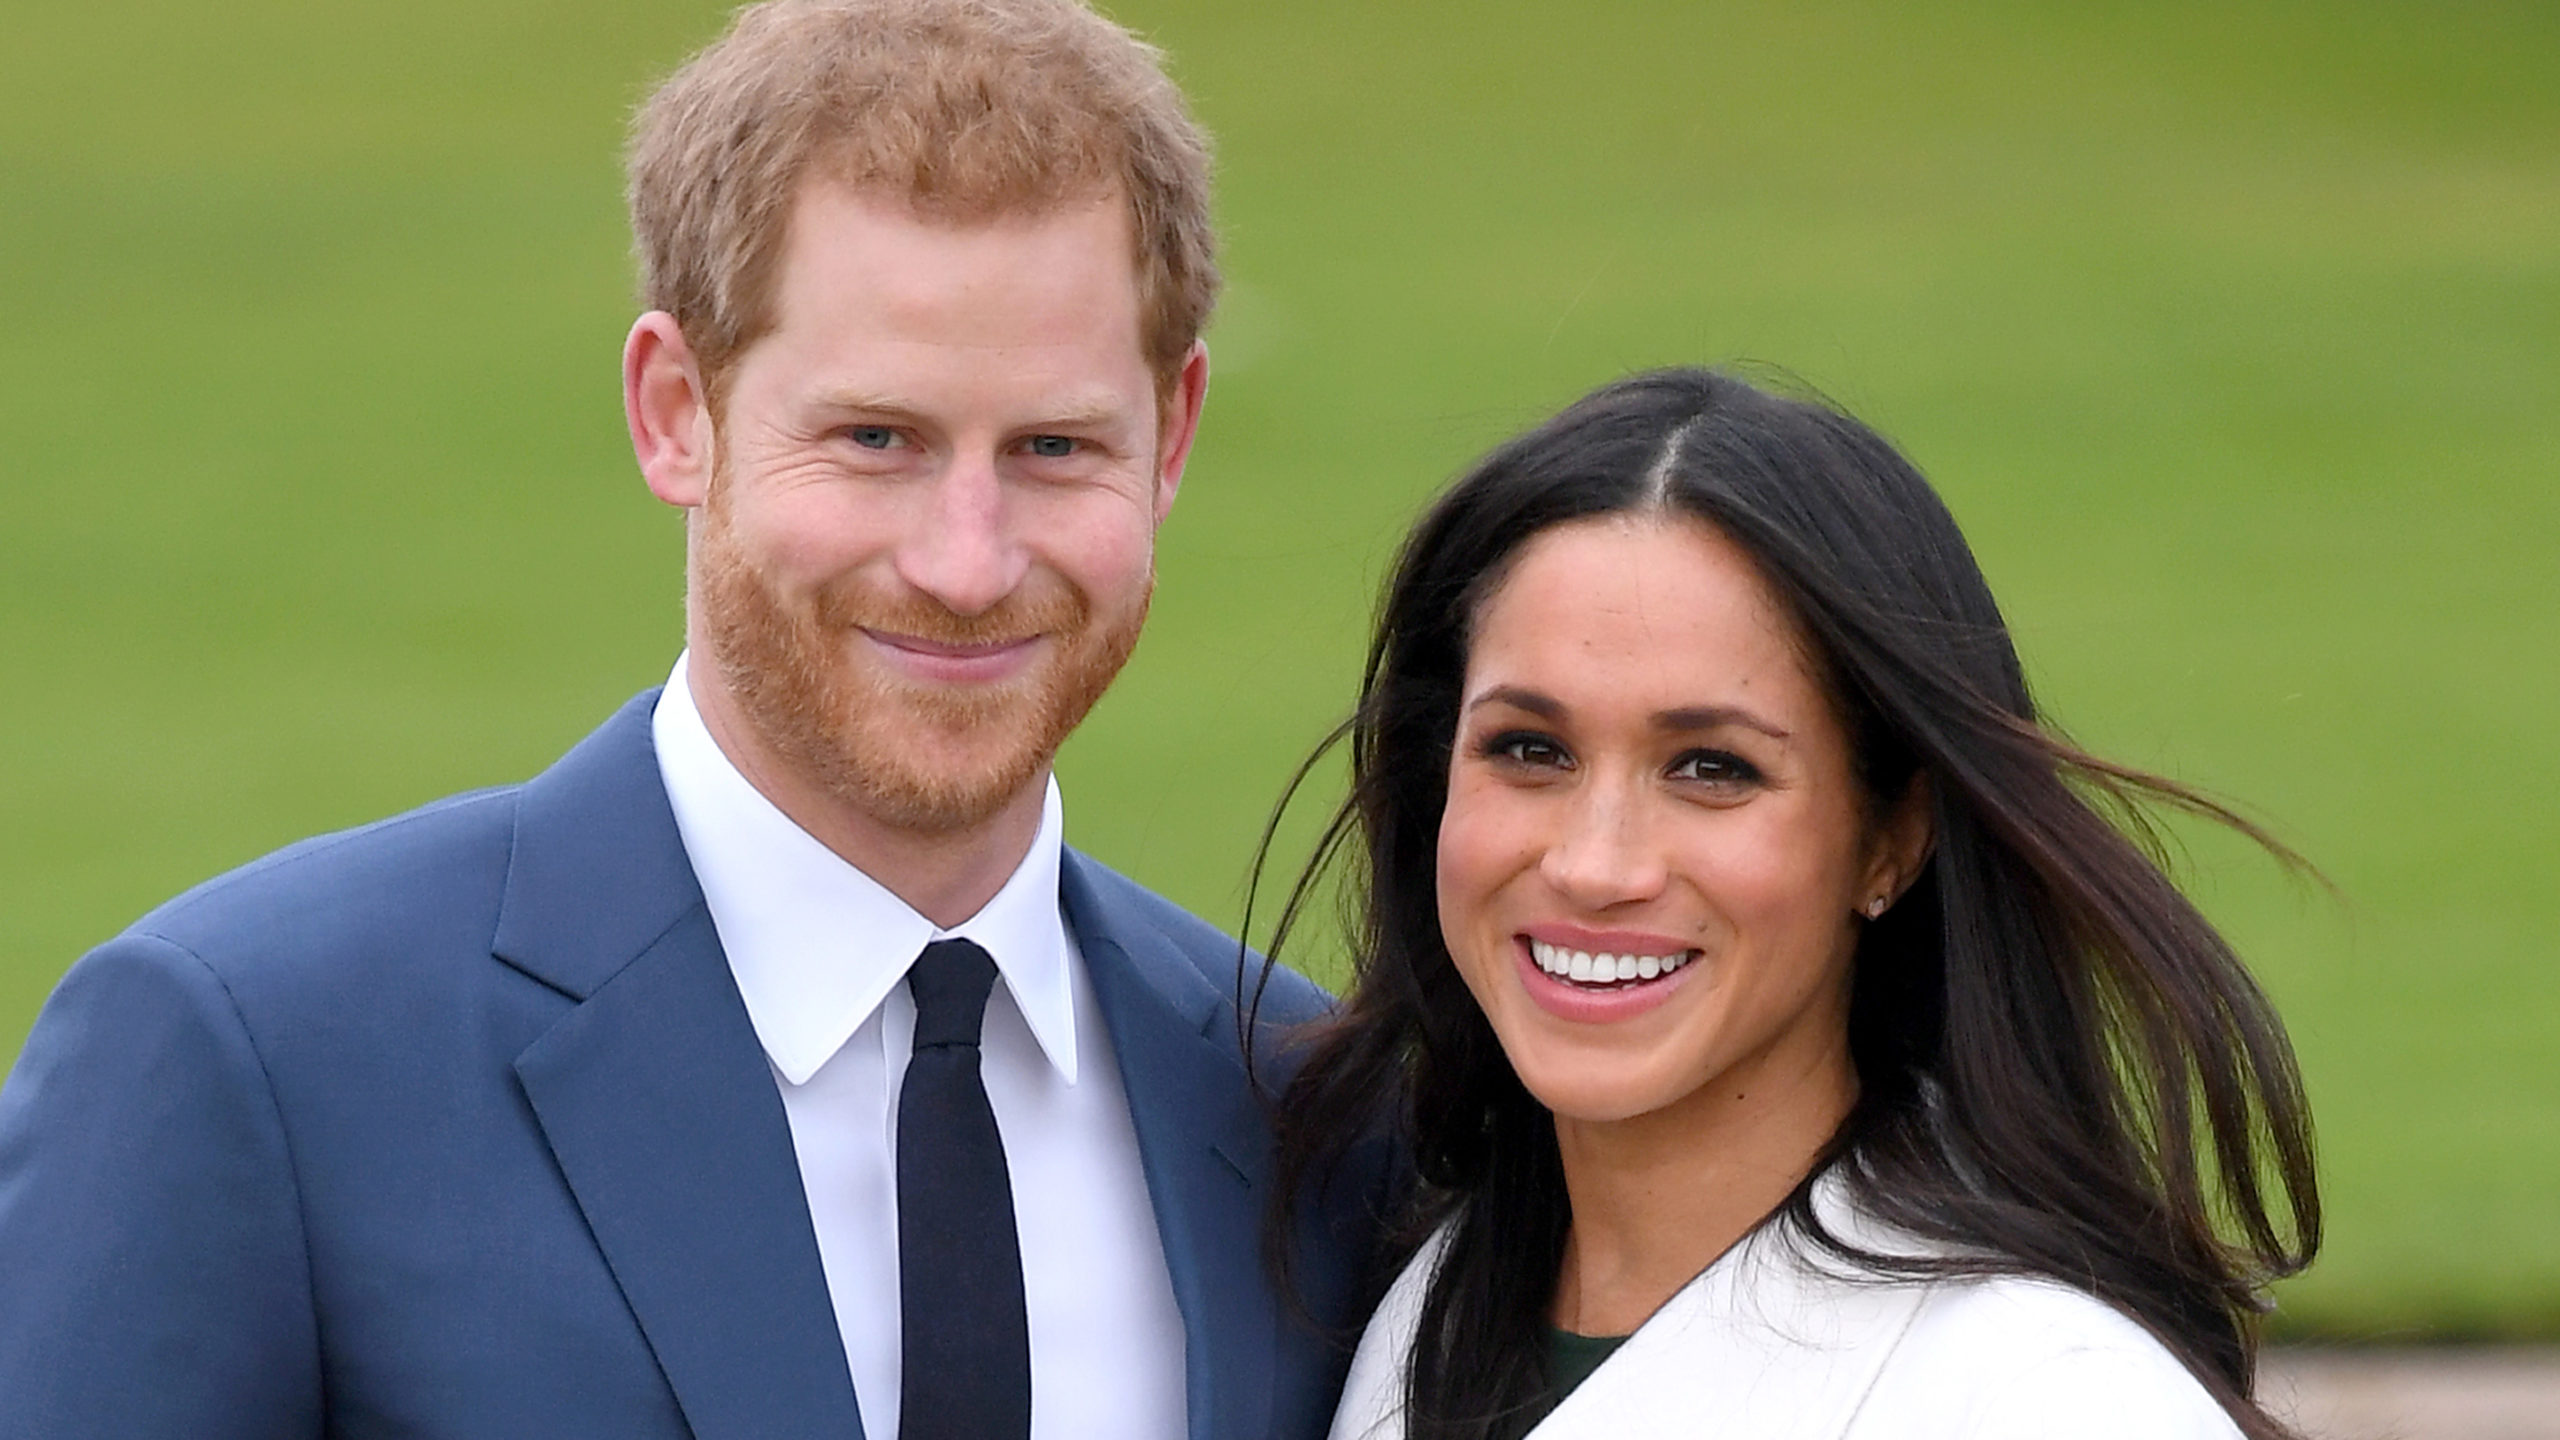 Meghan Markle drops HRH title, Prince Harry keeps his on Lilibet Diana’s birth certificate